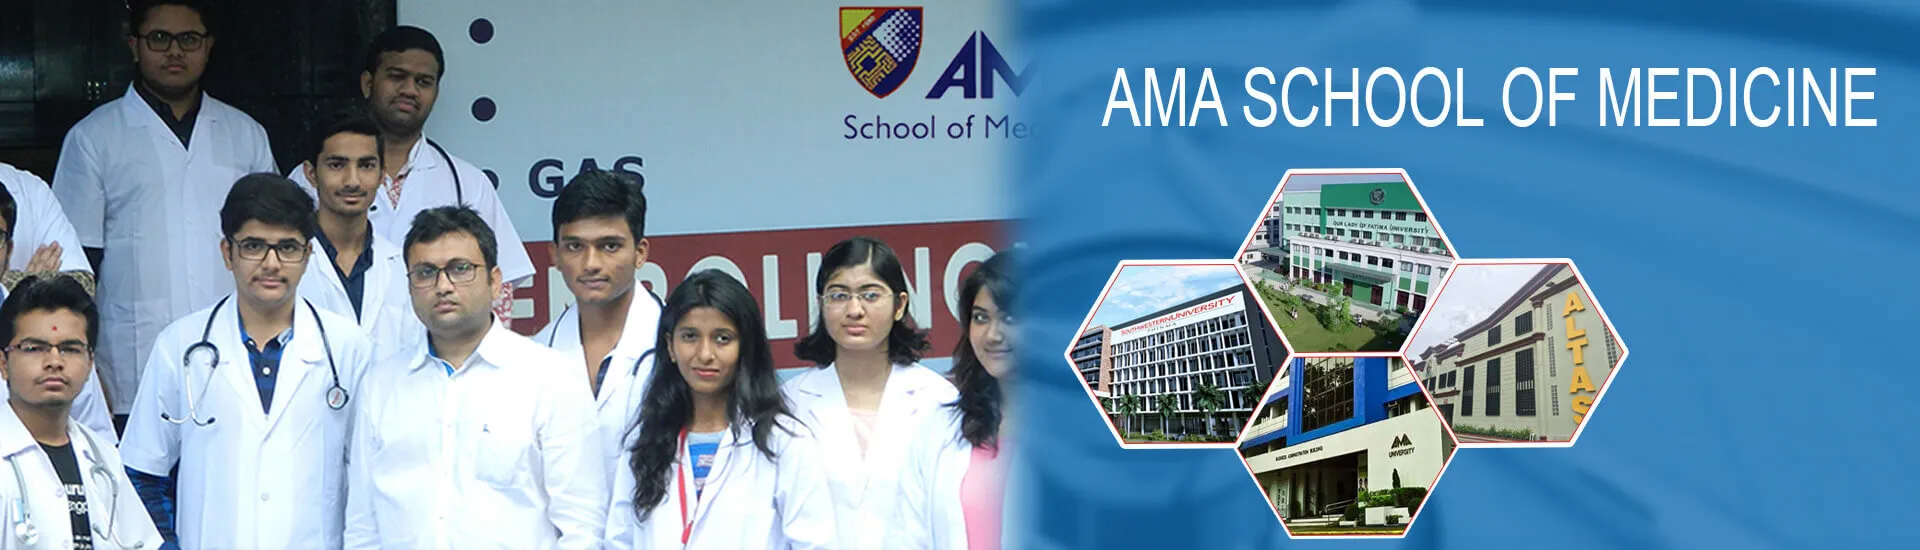 MBBS in philippines admission process